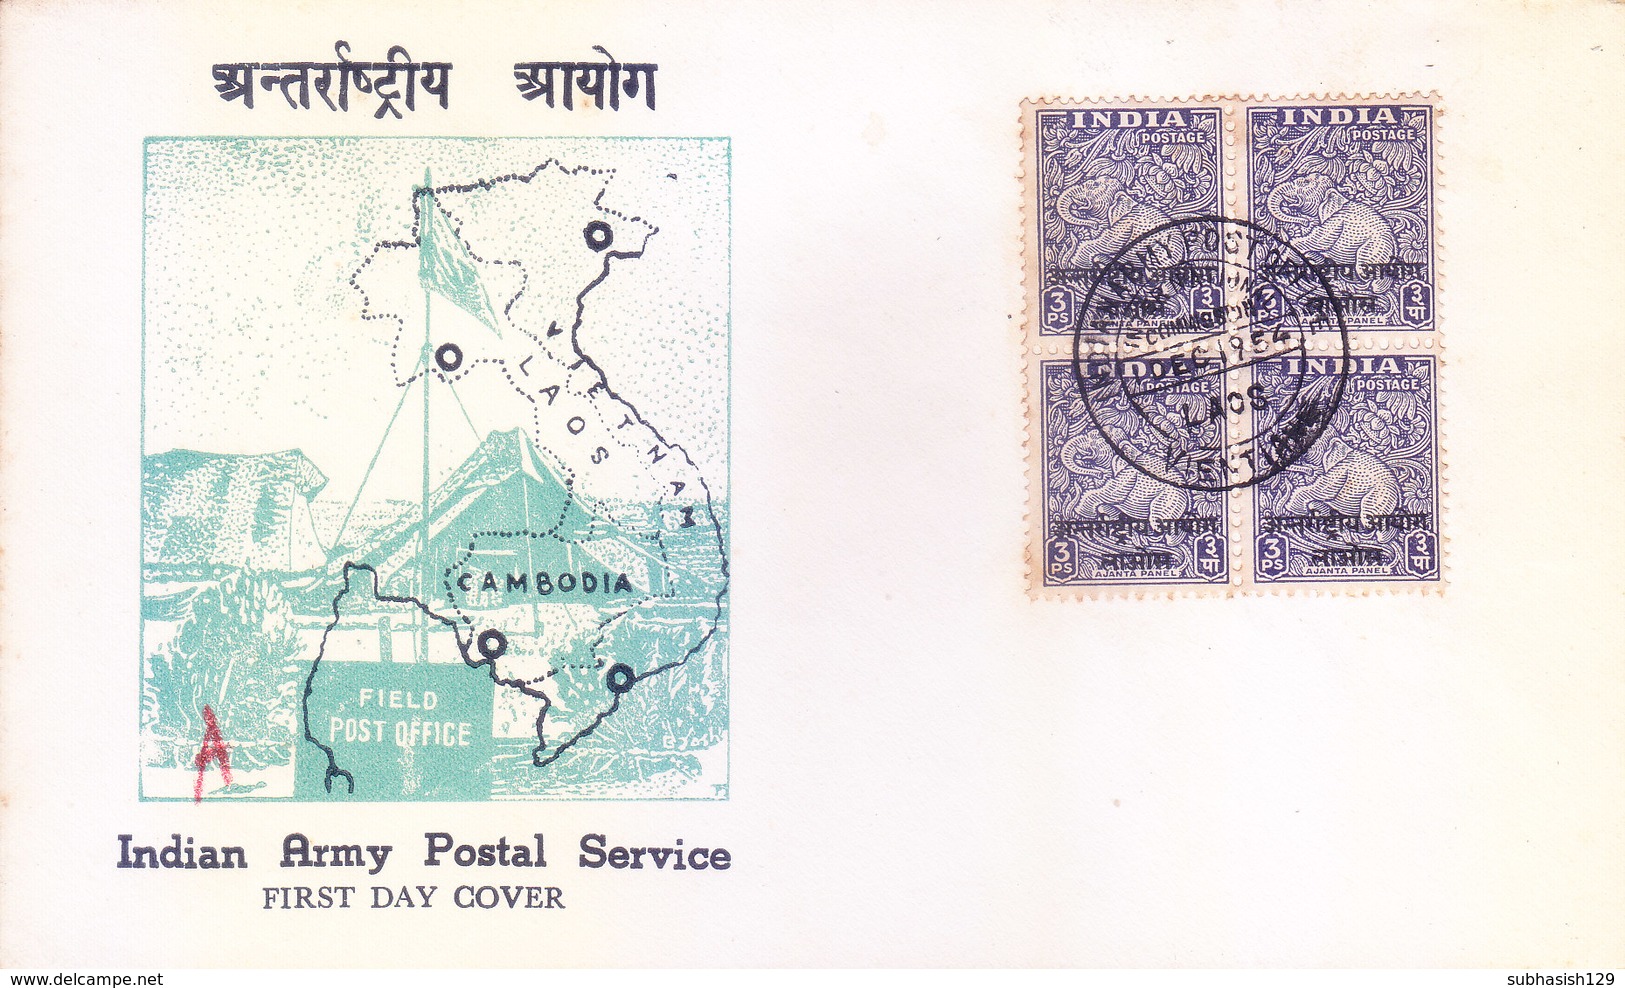 INDIA 1954 FIRST DAY COVER - INTERNATIONAL CONTROL COMMISSION - LAOS, VIETNAM - Military Service Stamp